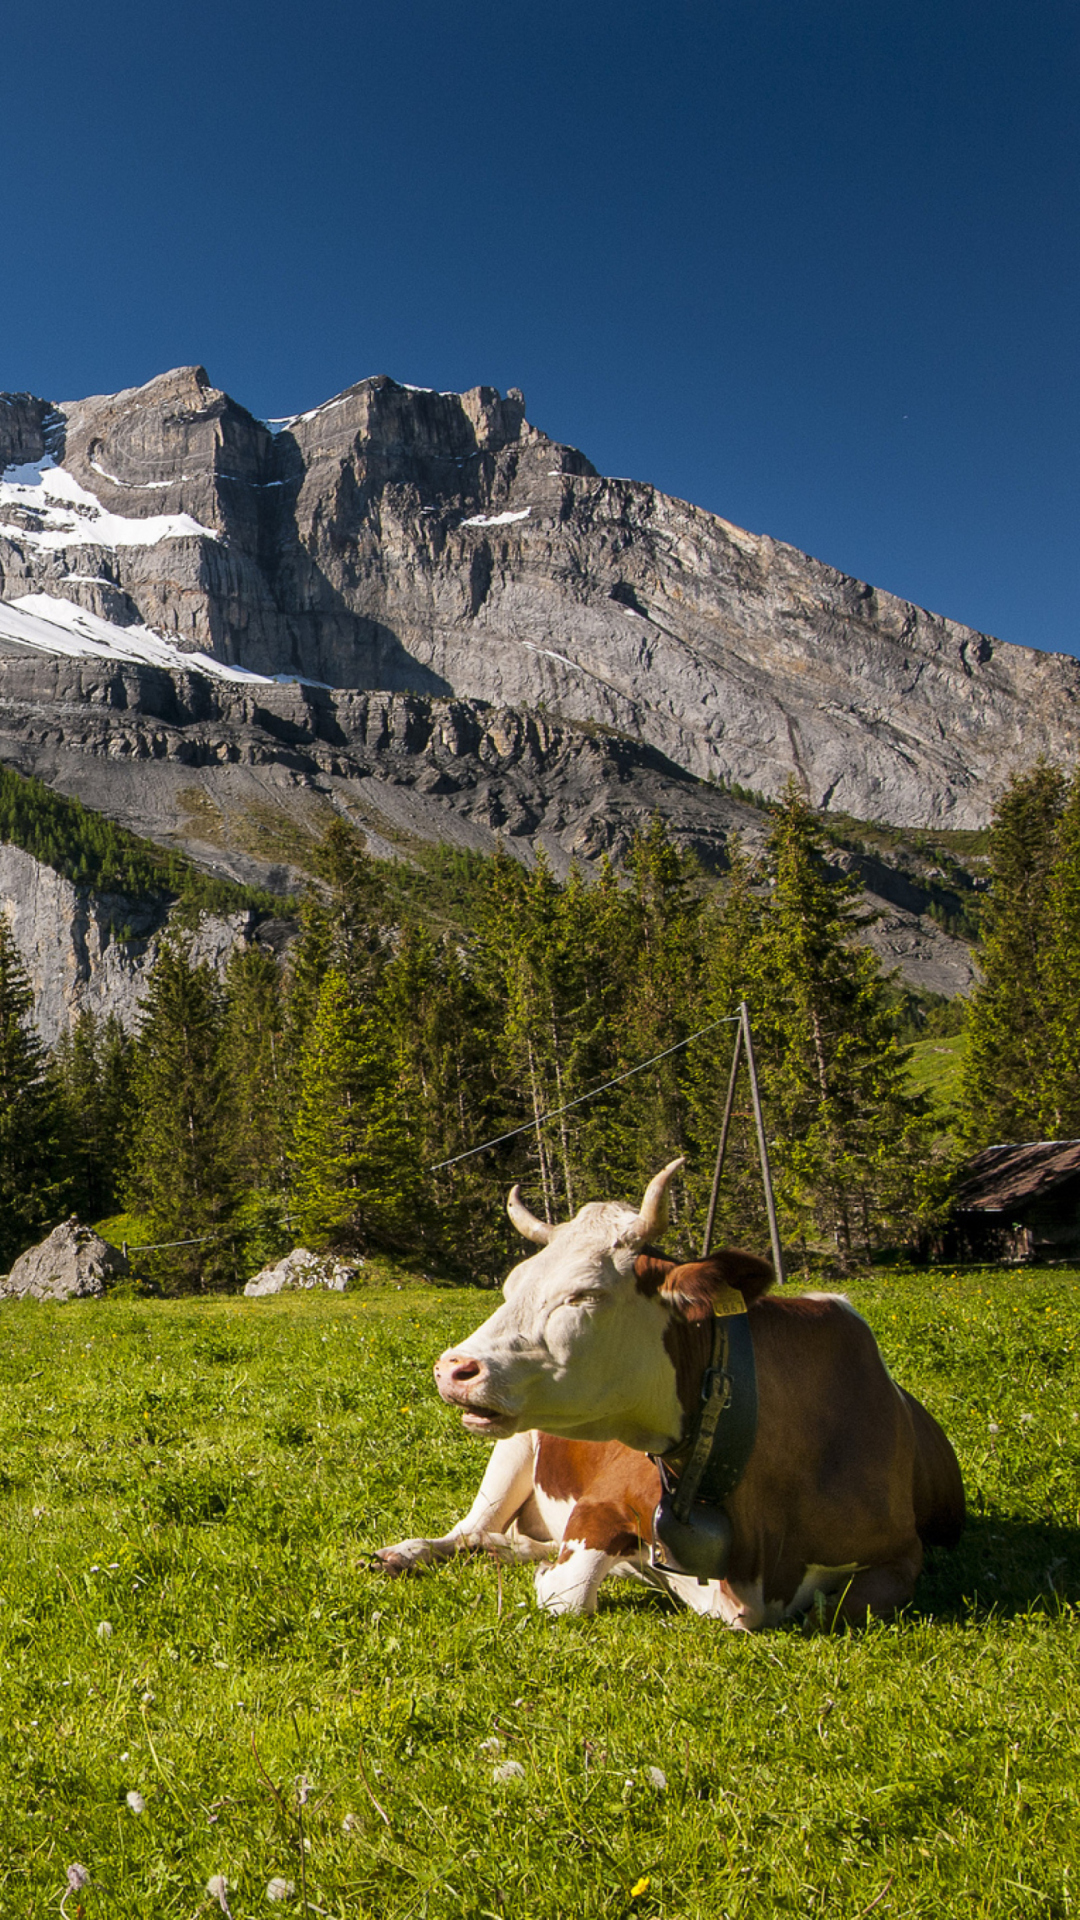 Switzerland Mountains And Cows wallpaper 1080x1920